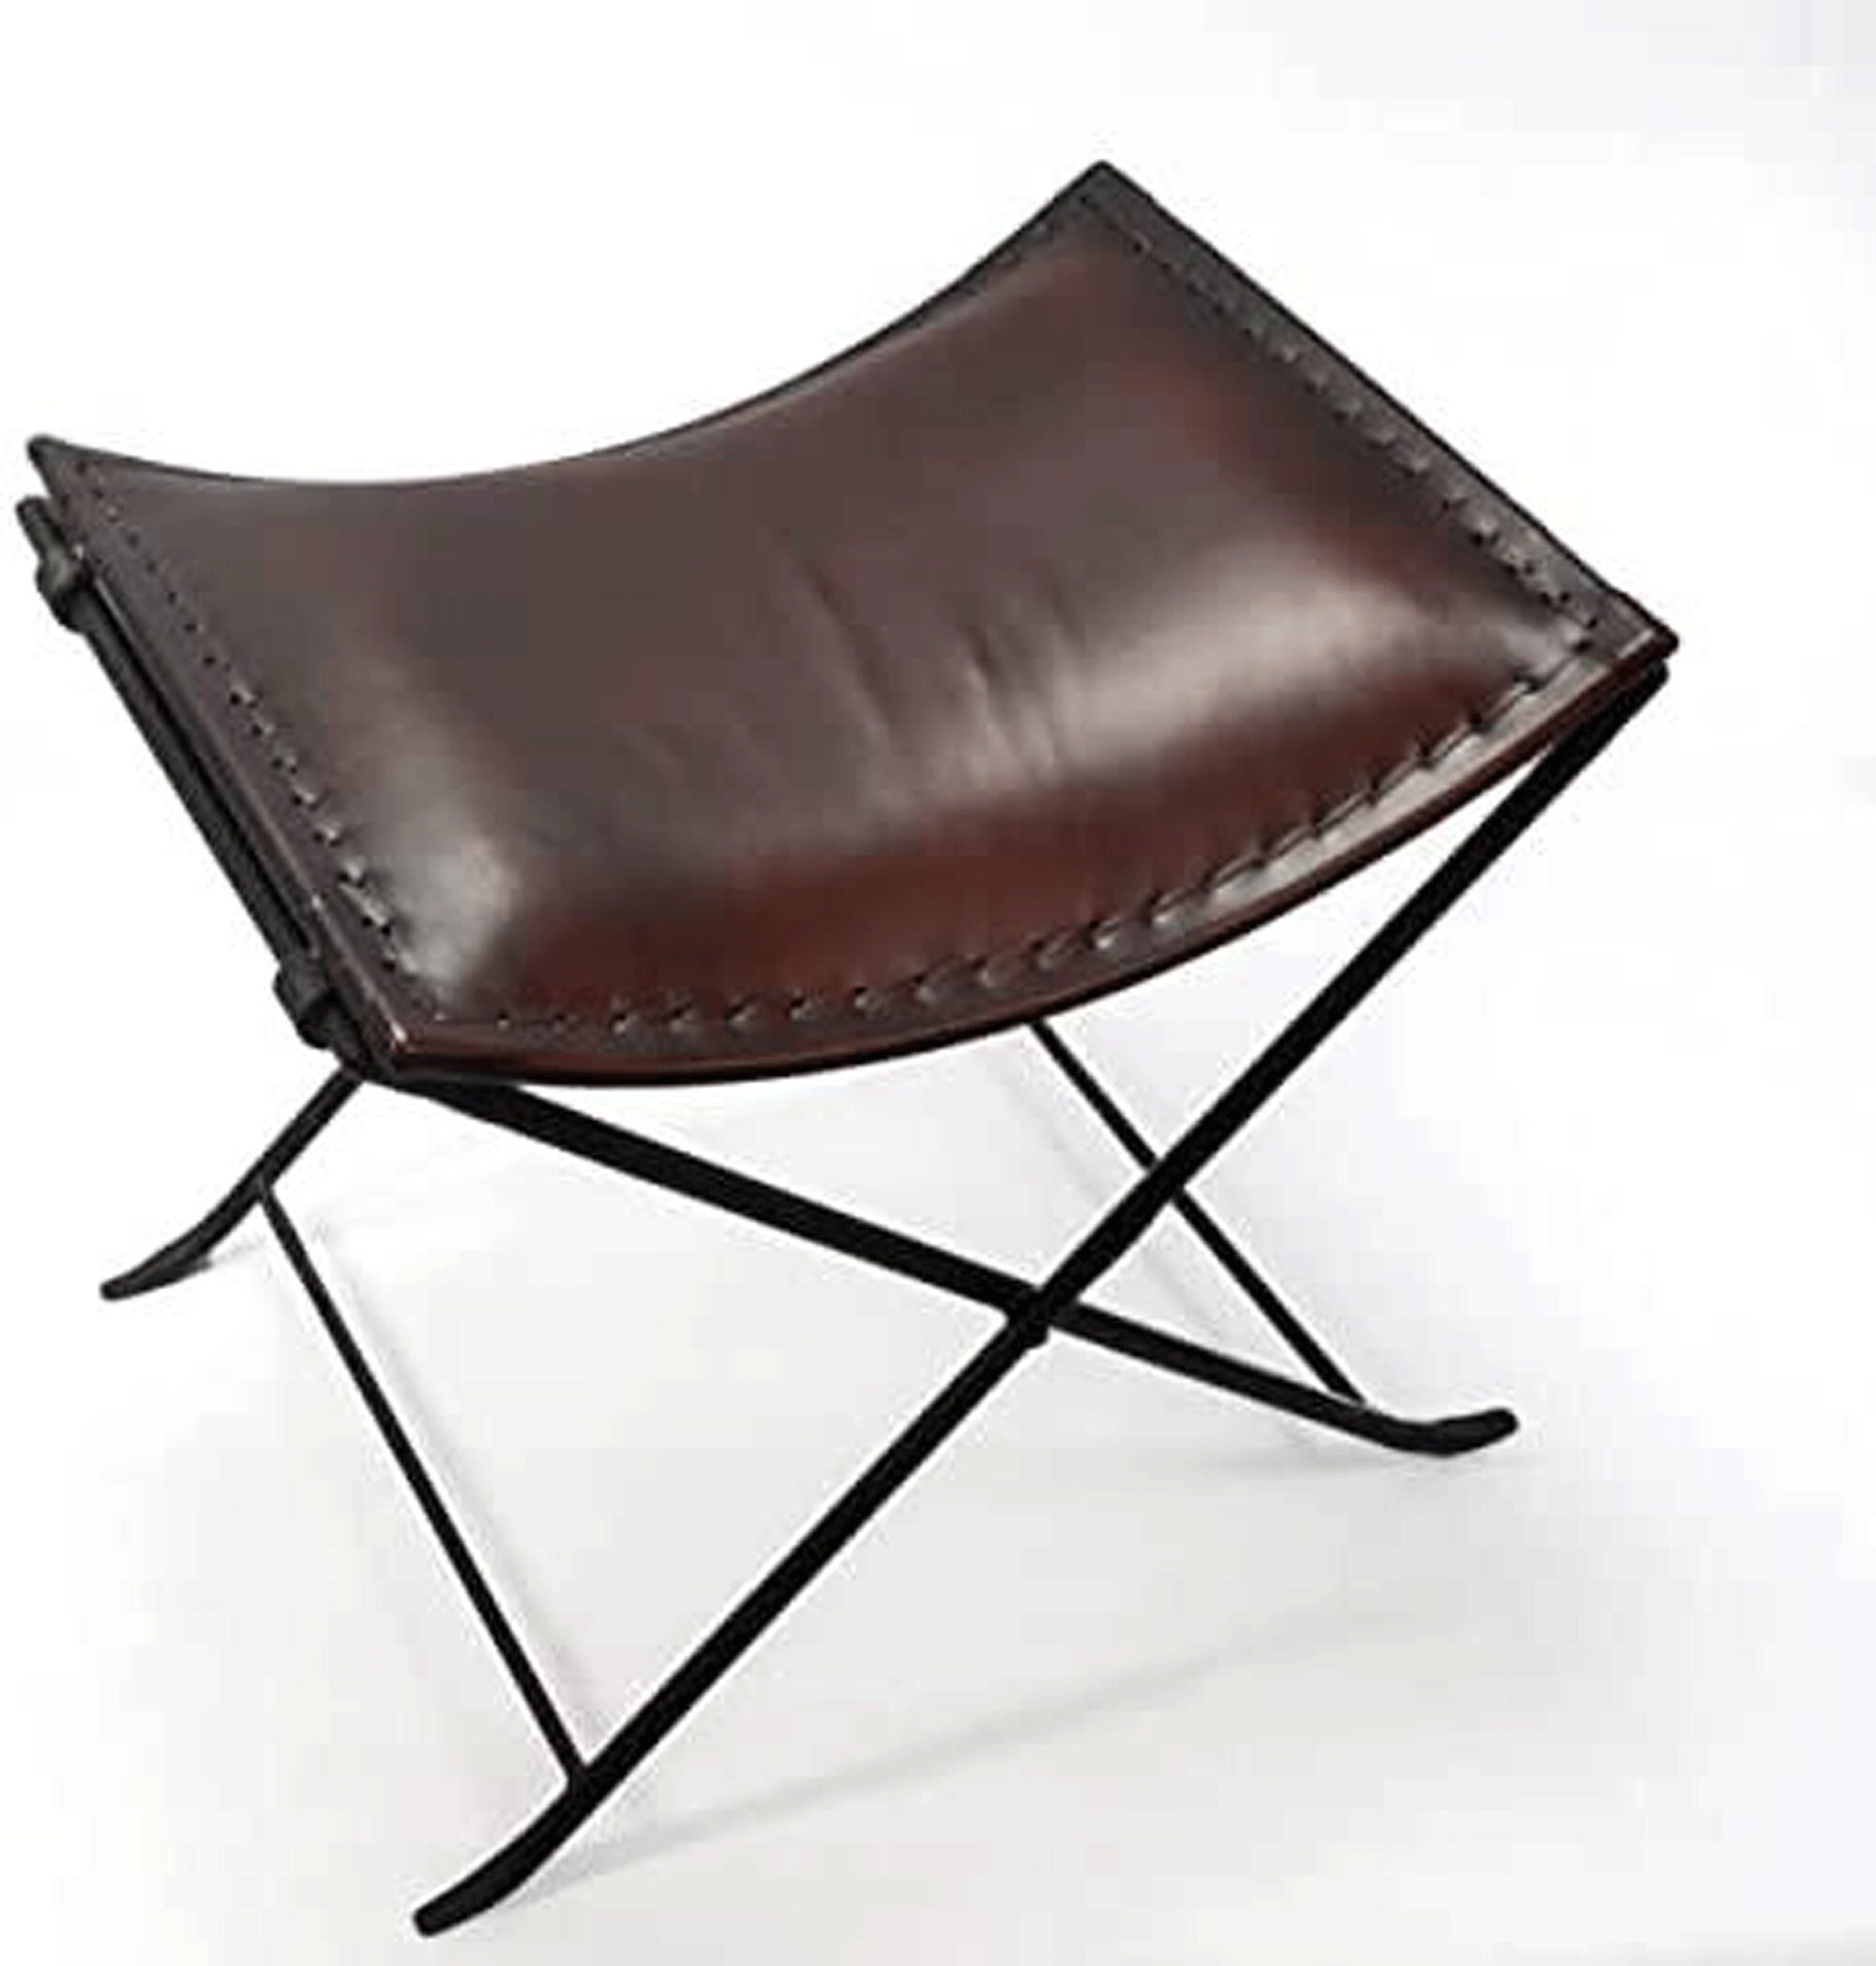 Leather Living Room Chairs-Butterfly Stool Chair Dark Brown Leather Butterfly Chair Cum Stool-Handmade with Powder Coated Folding Iron Frame